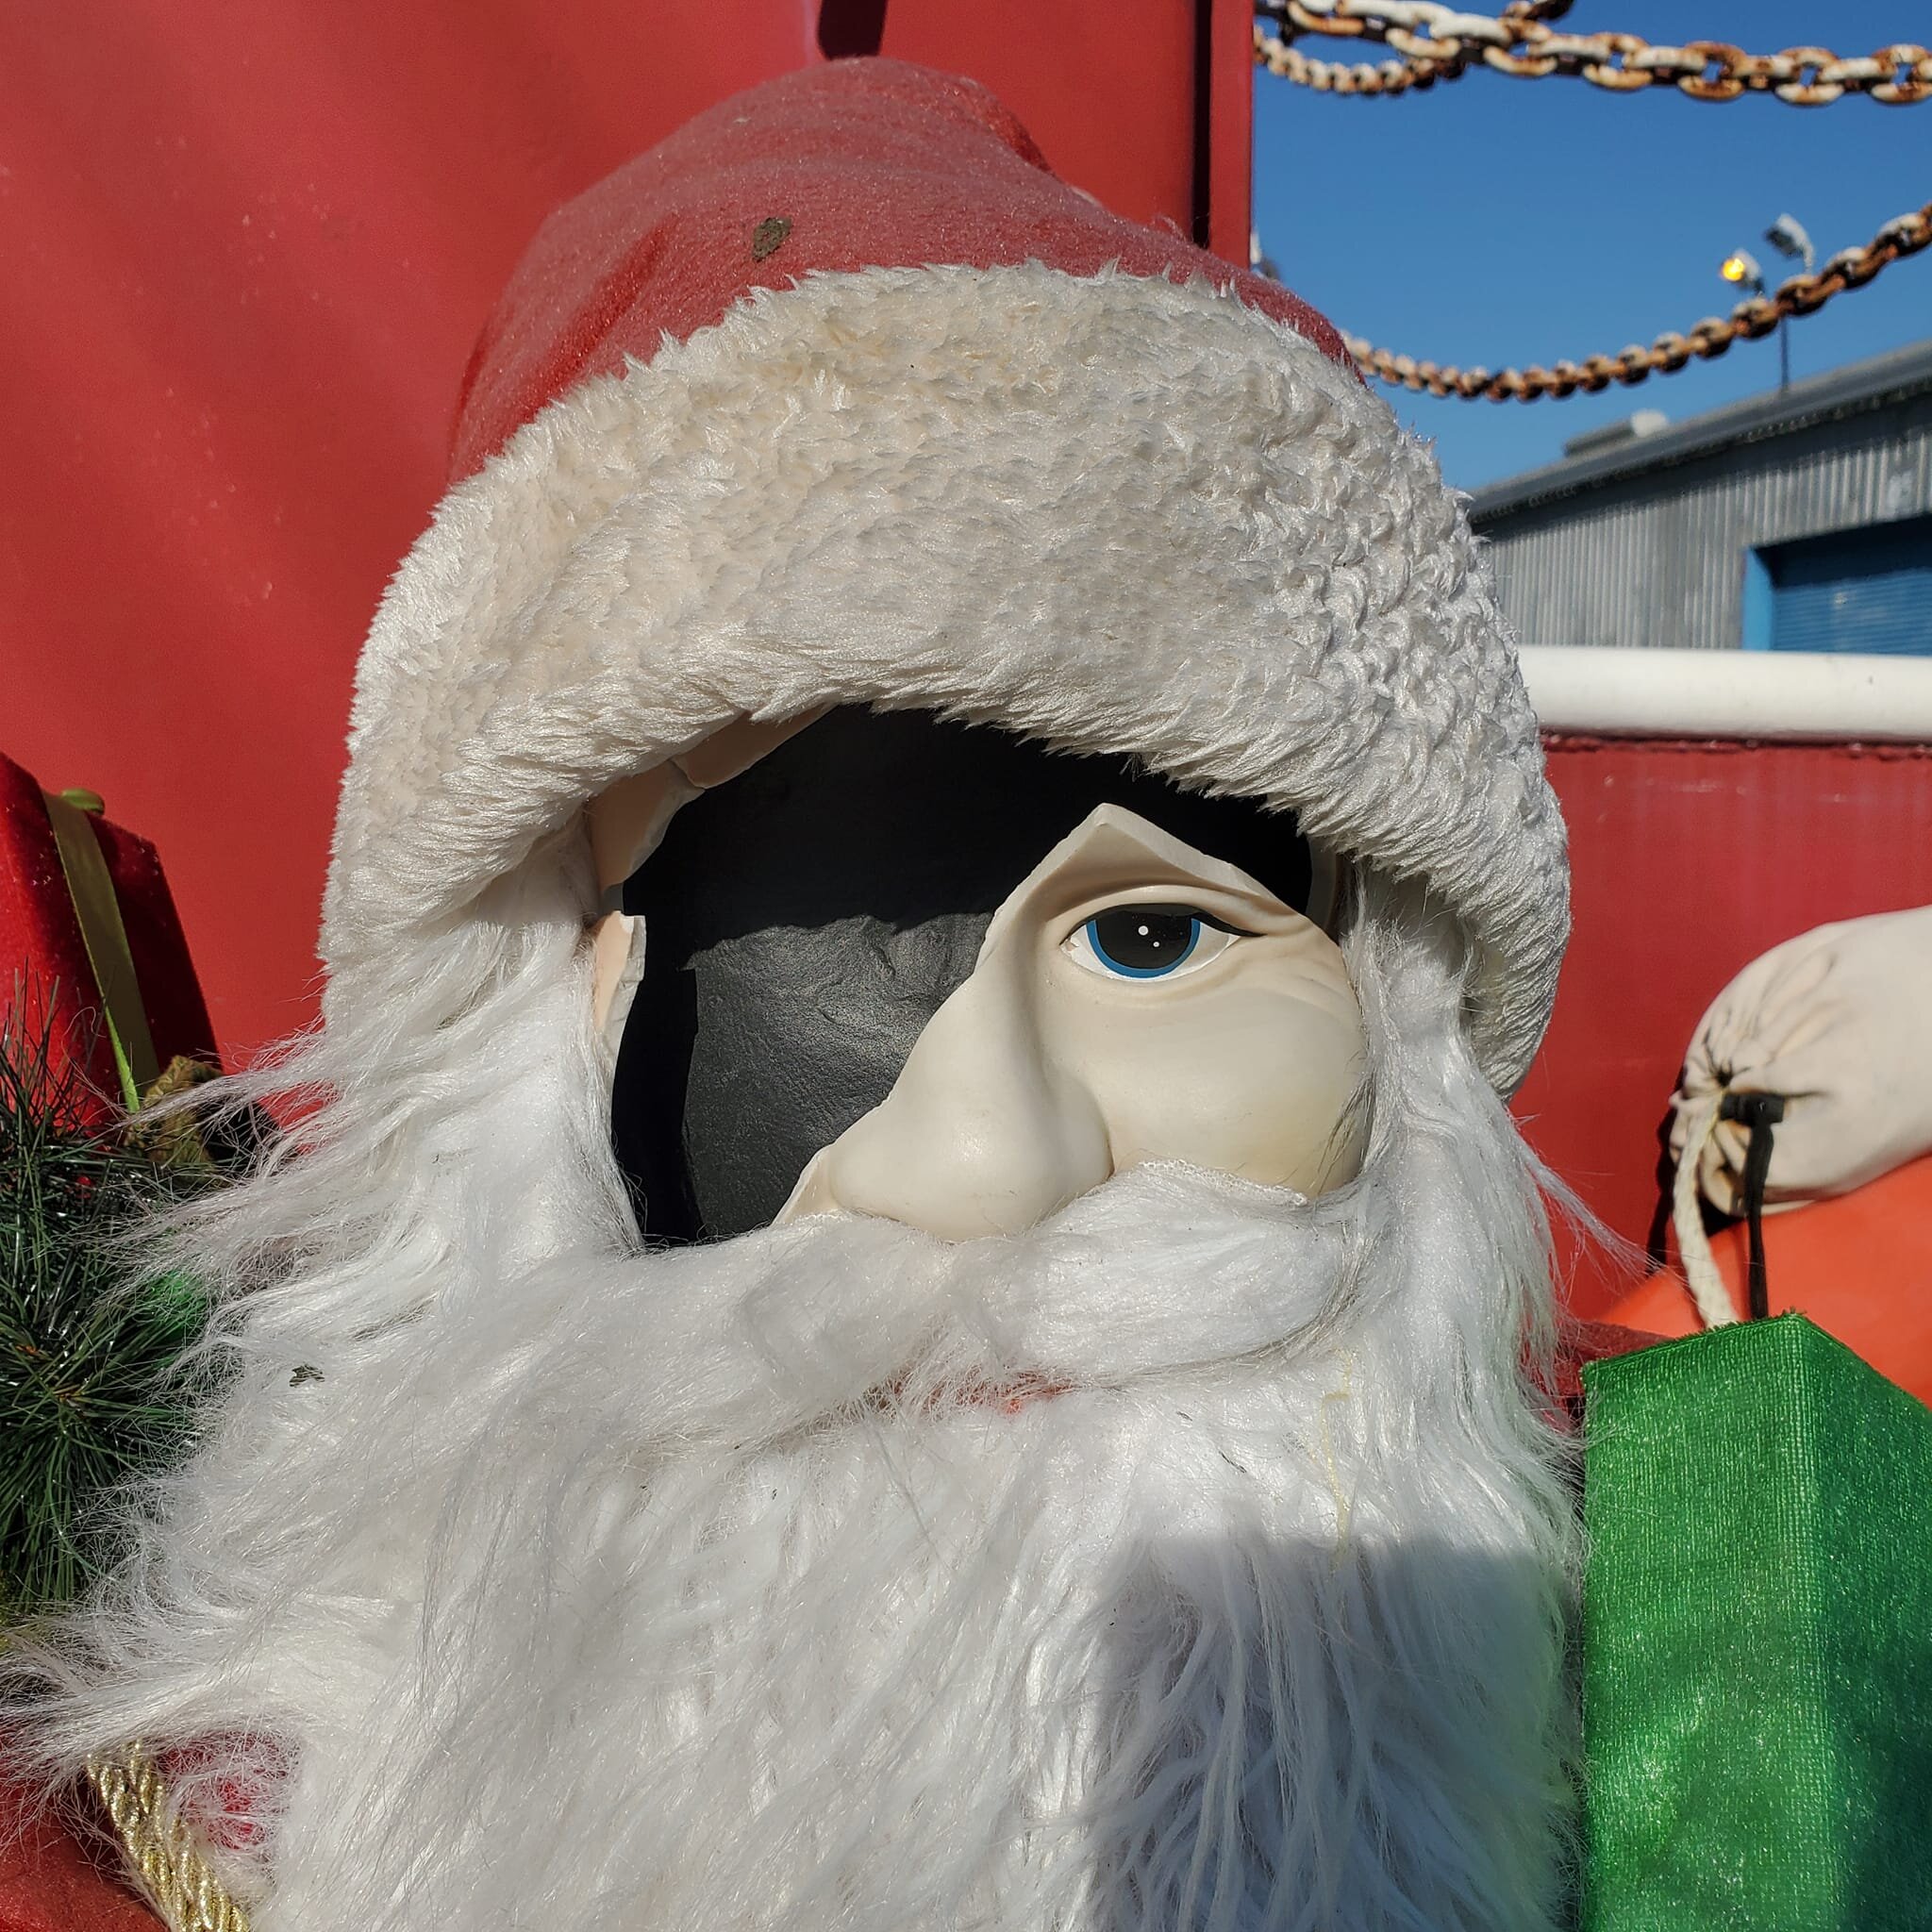 Free cracked-face Santa sbout 5' high. Currently sunbathing during  #TankerTime (as you could be) on the deck of tanker #MaryWhalen. Goes to garbage Monday night if not claimed.

#RedHook #free